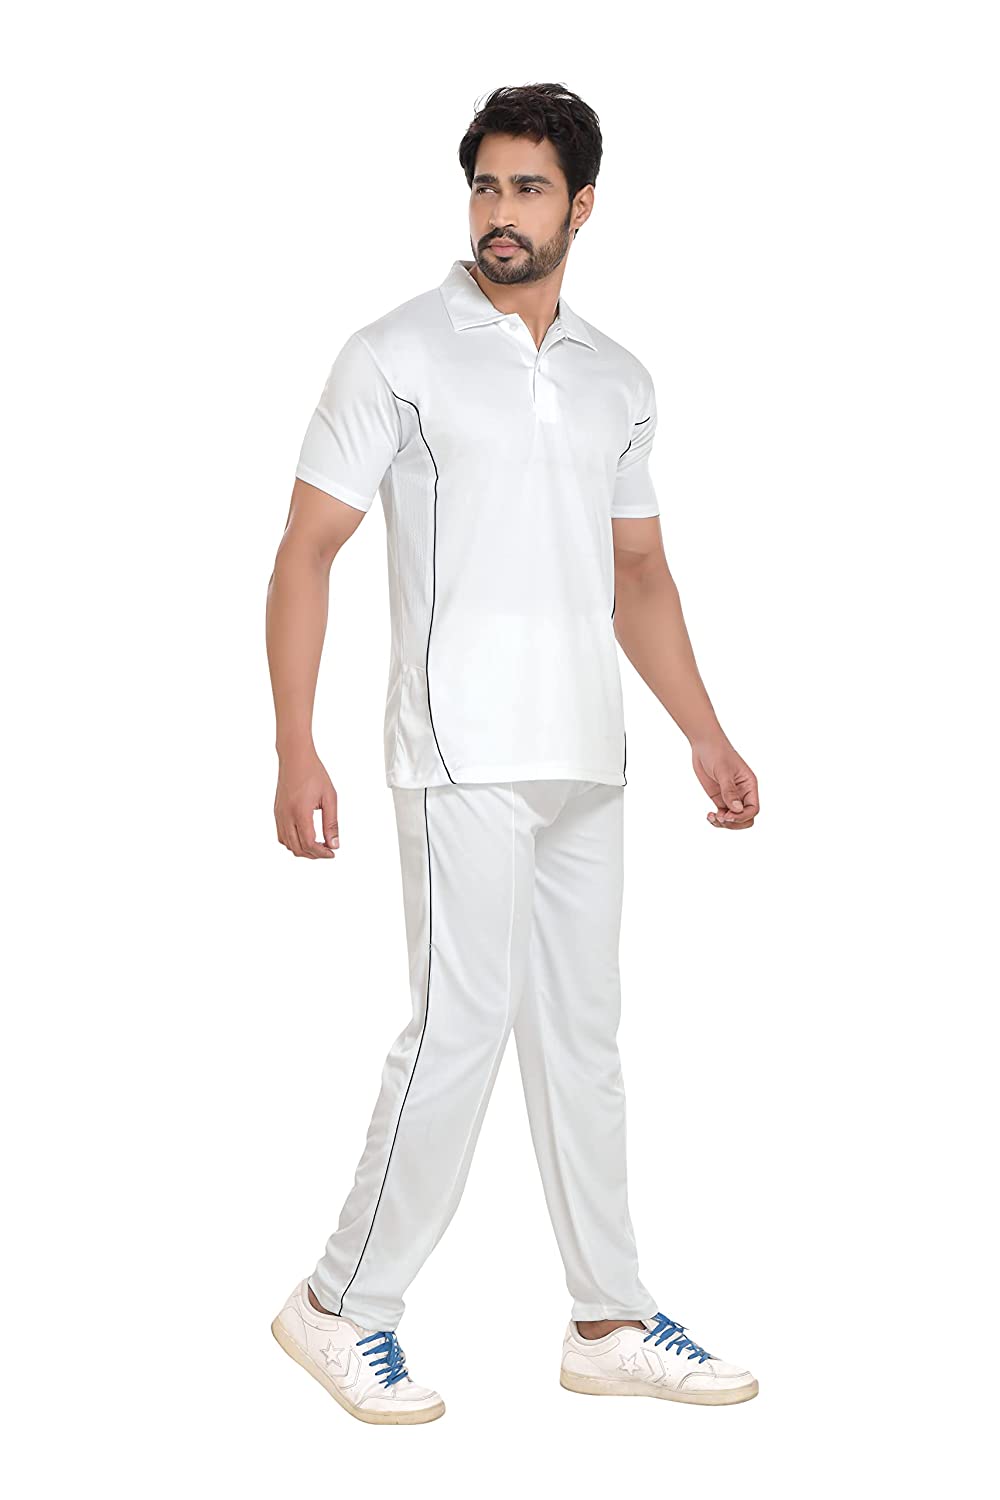 Men White Cricket Dress at Rs 900/piece in Hyderabad | ID: 13492302630